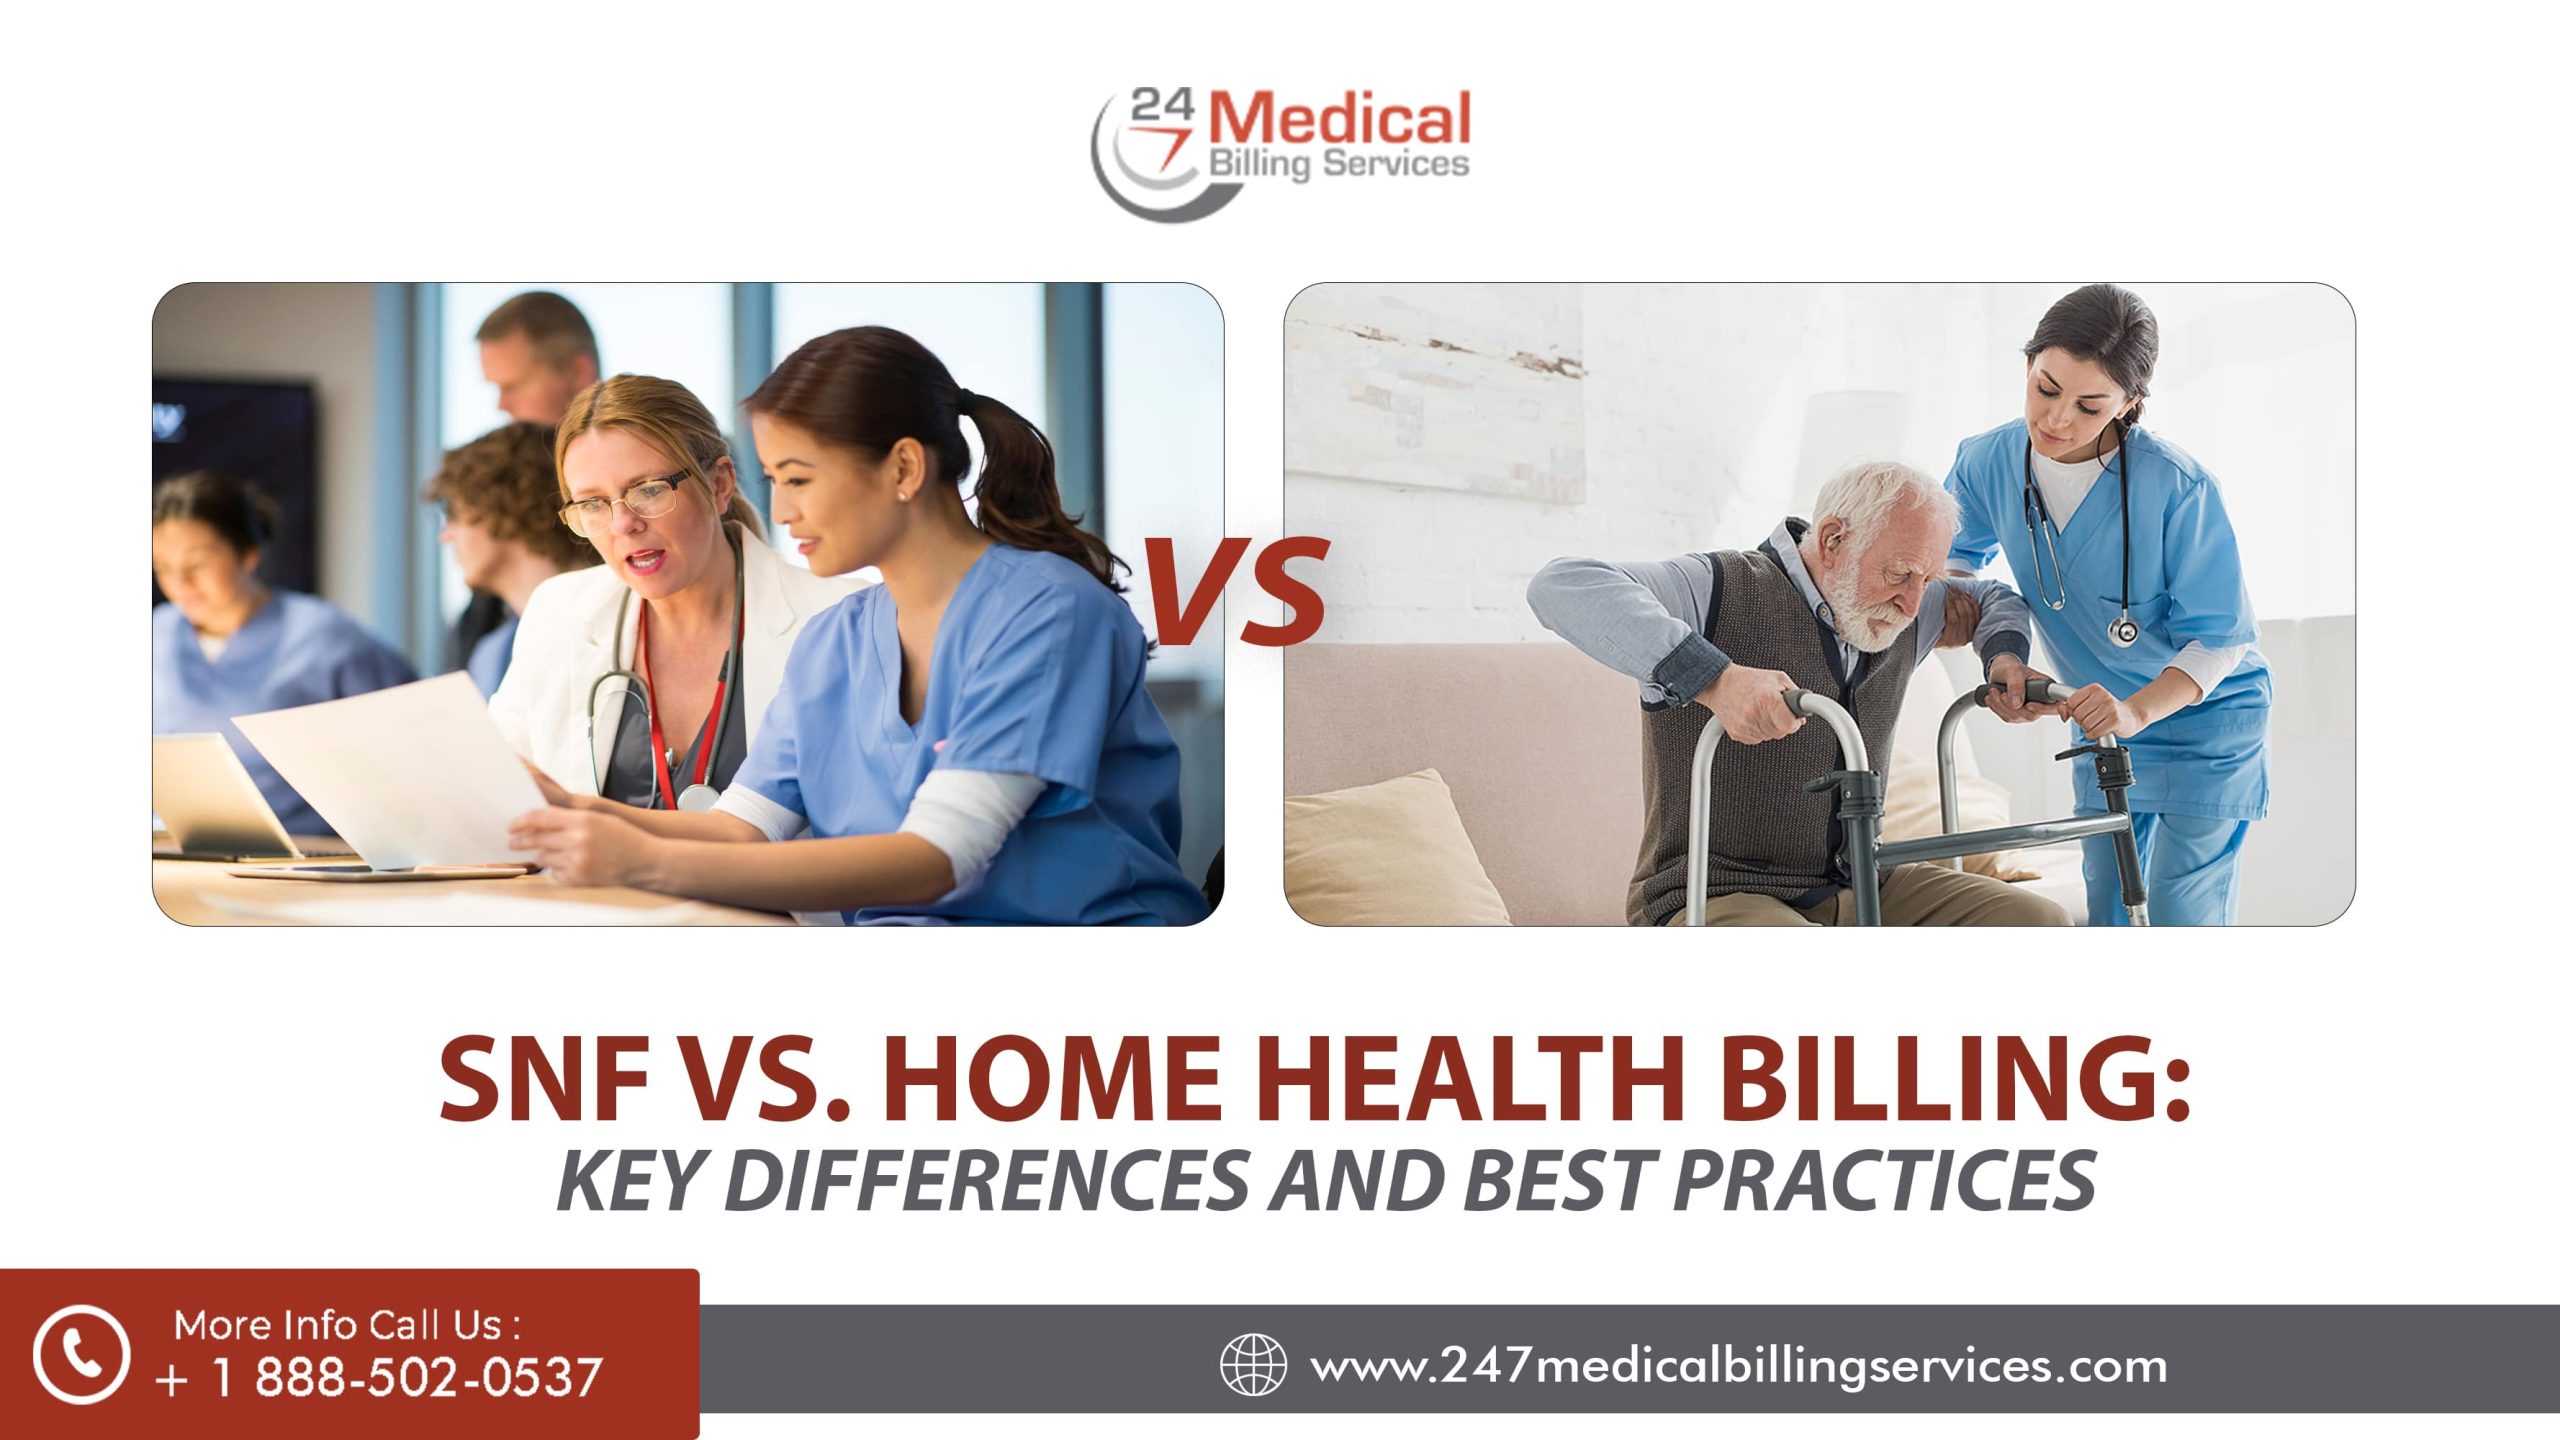  SNF vs. Home Health Billing: Key Differences and Best Practices